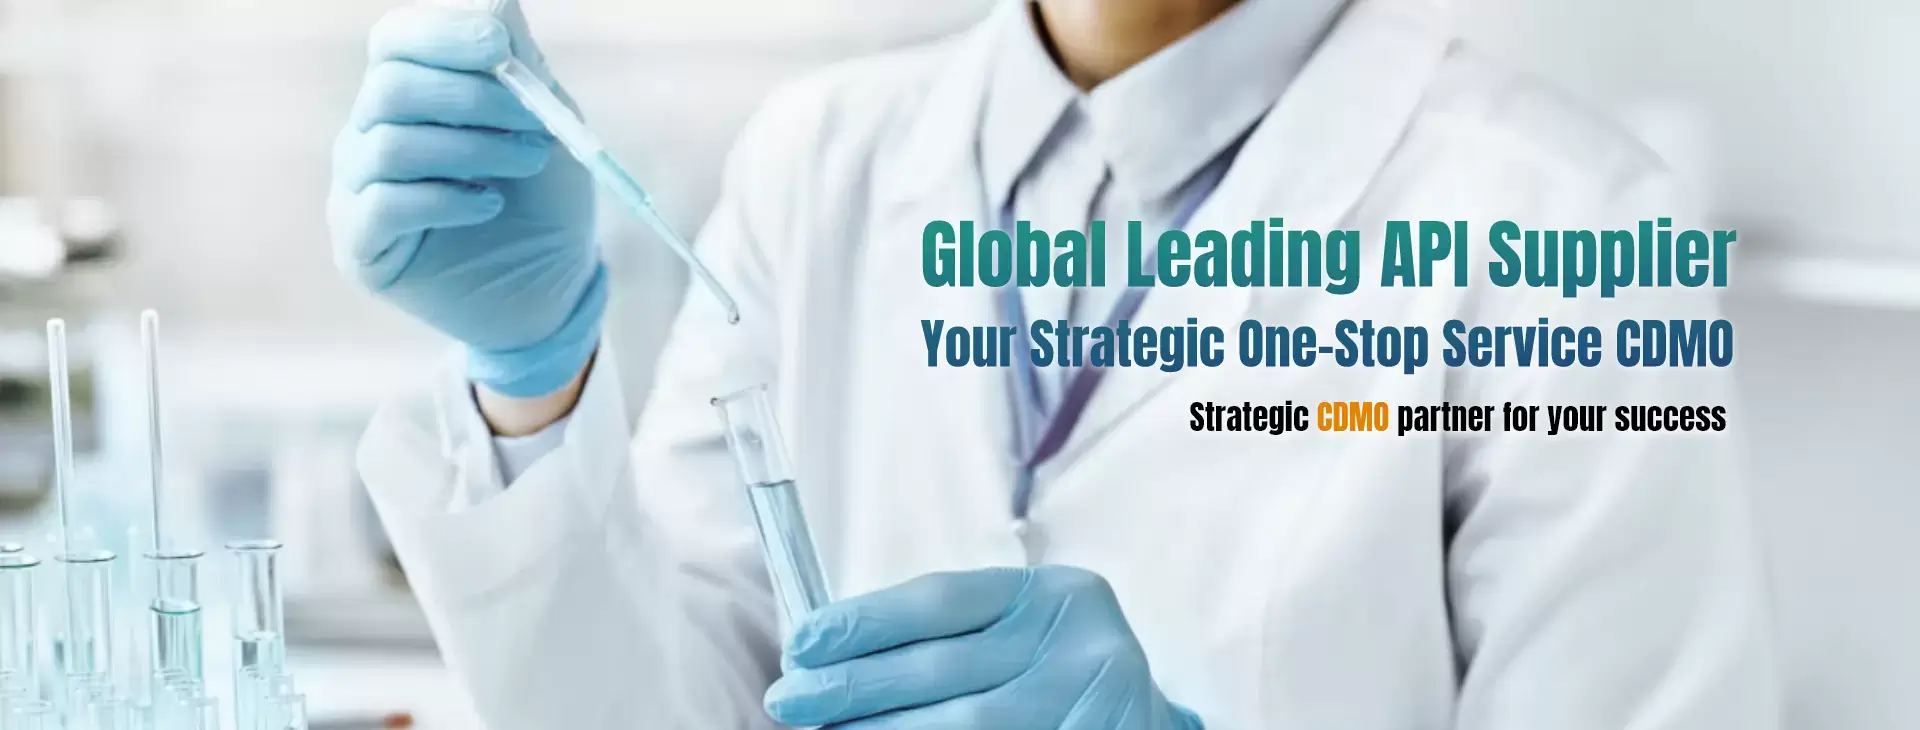 Global Leading API Supplier Your Strategic One-Stop Service CDMO